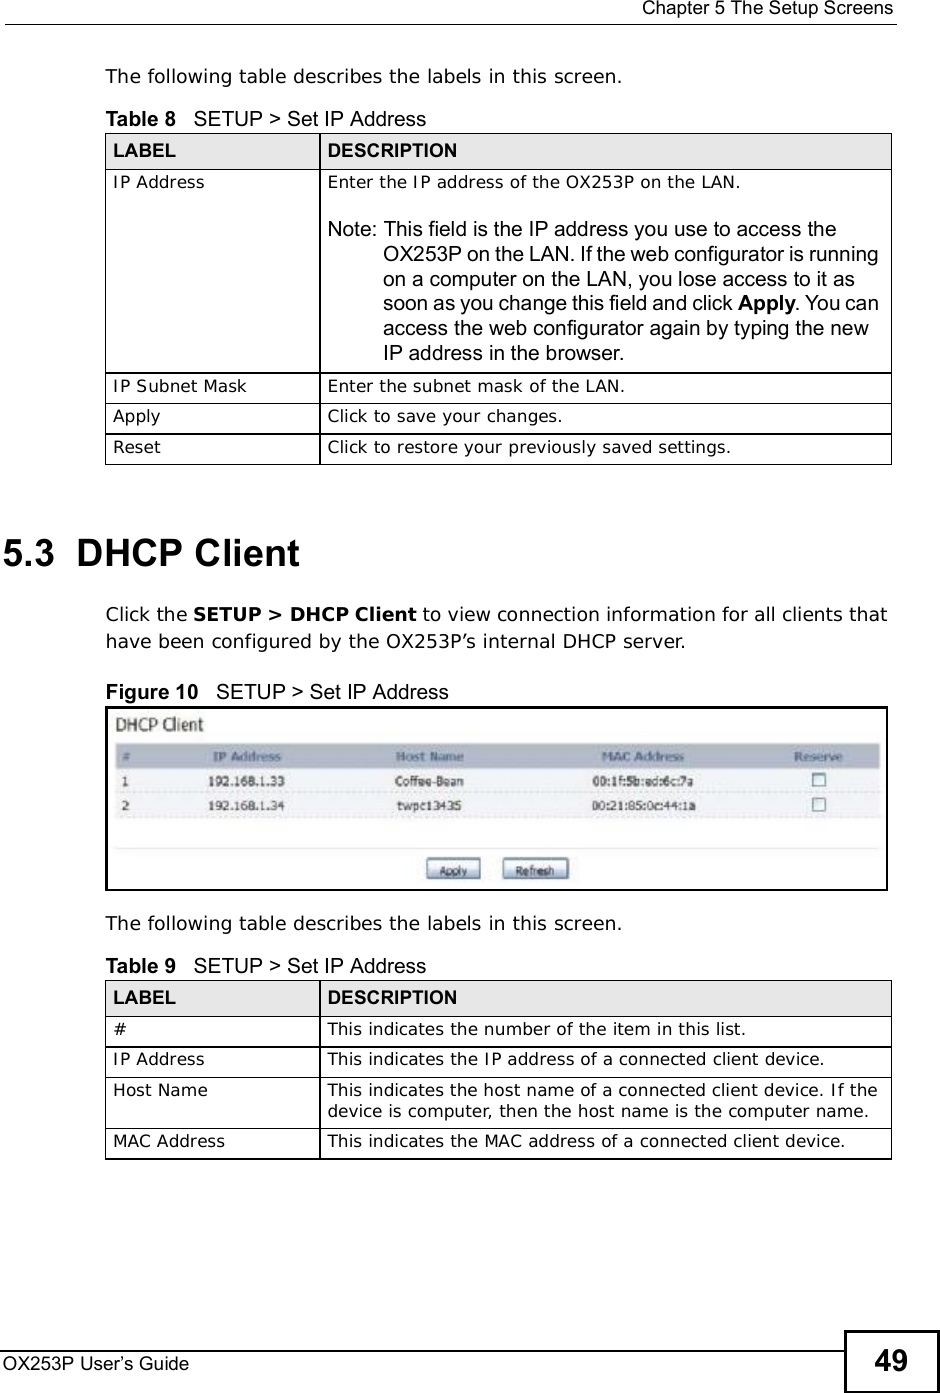  Chapter 5The Setup ScreensOX253P User’s Guide 49The following table describes the labels in this screen.  5.3  DHCP ClientClick the SETUP &gt; DHCP Client to view connection information for all clients that have been configured by the OX253P’s internal DHCP server.Figure 10   SETUP &gt; Set IP AddressThe following table describes the labels in this screen.  Table 8   SETUP &gt; Set IP AddressLABEL DESCRIPTIONIP Address Enter the IP address of the OX253P on the LAN.Note: This field is the IP address you use to access the OX253P on the LAN. If the web configurator is running on a computer on the LAN, you lose access to it as soon as you change this field and click Apply. You can access the web configurator again by typing the new IP address in the browser.IP Subnet Mask Enter the subnet mask of the LAN.Apply Click to save your changes.Reset Click to restore your previously saved settings.Table 9   SETUP &gt; Set IP AddressLABEL DESCRIPTION#This indicates the number of the item in this list.IP Address This indicates the IP address of a connected client device.Host Name This indicates the host name of a connected client device. If the device is computer, then the host name is the computer name.MAC Address This indicates the MAC address of a connected client device.